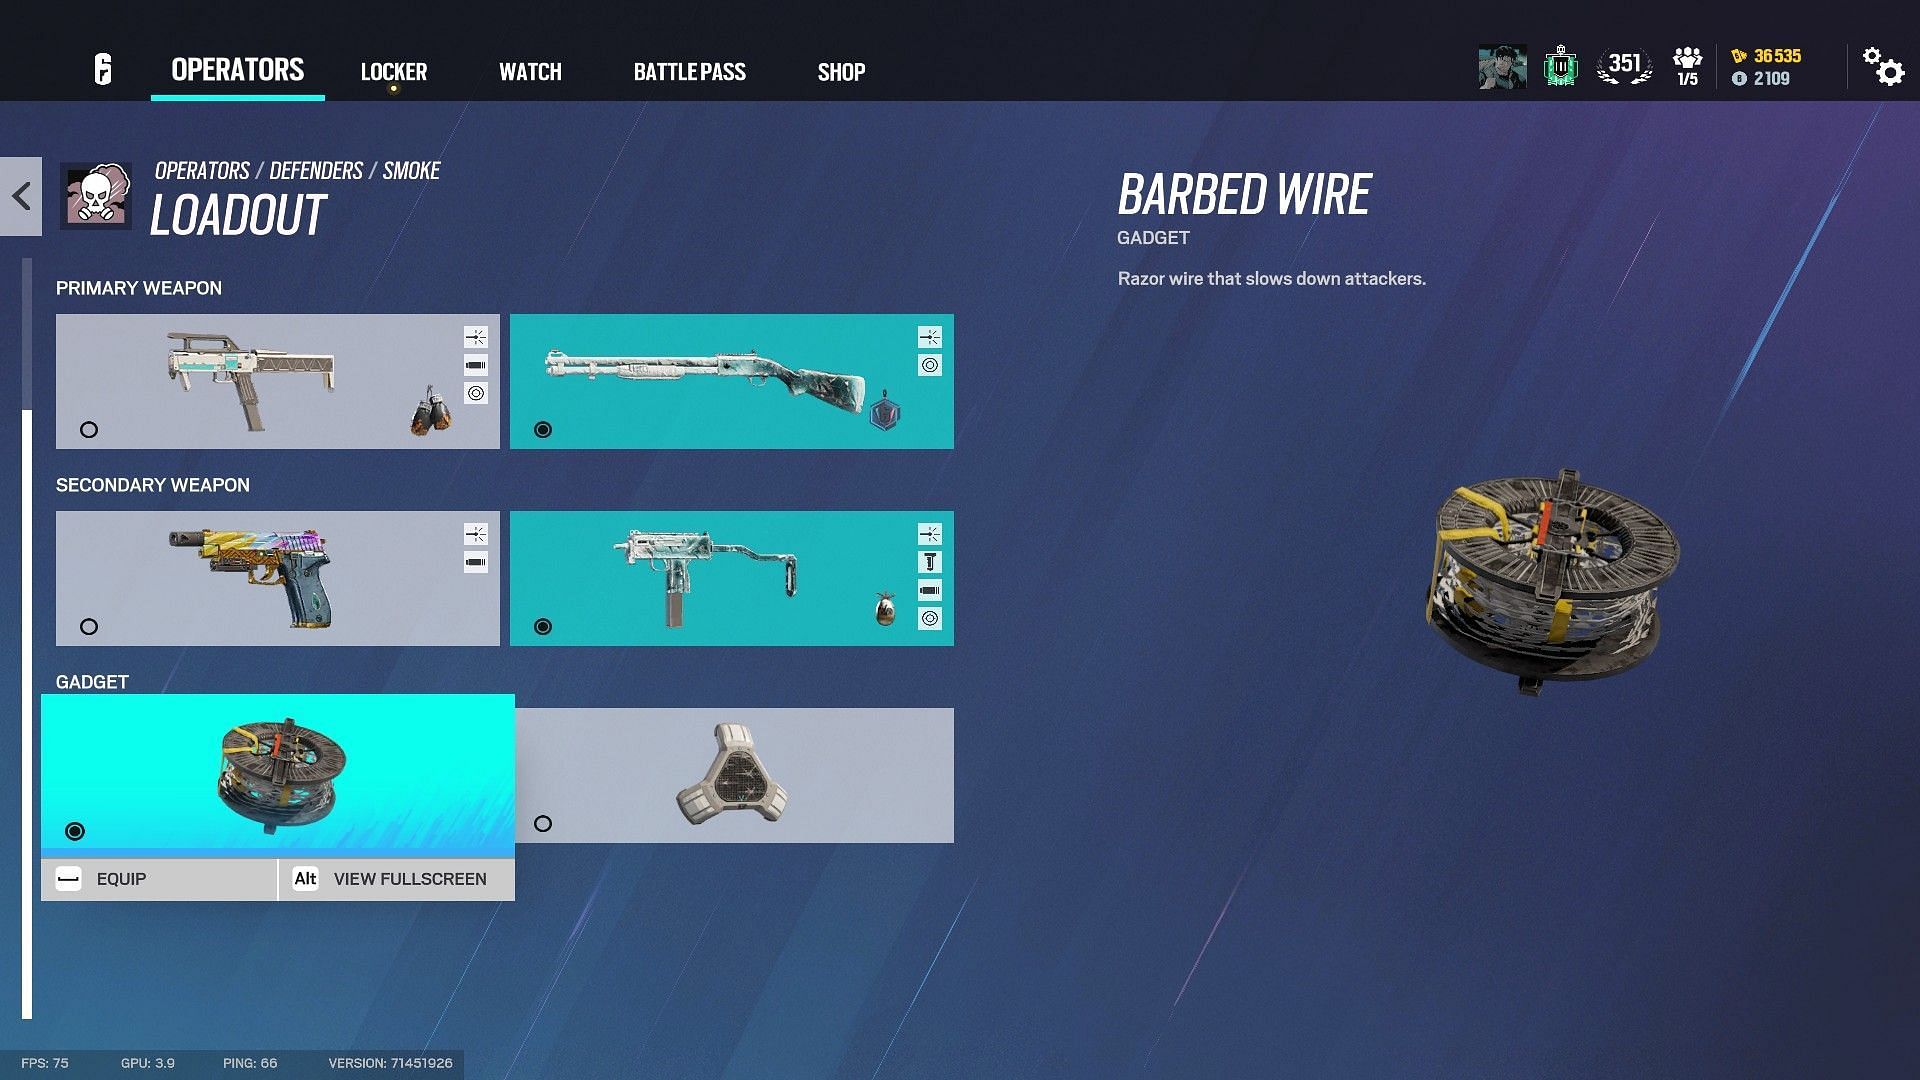 Barbed wire is the best secondary gadget choice in the best Smoke loadout. (Image via Ubisoft)